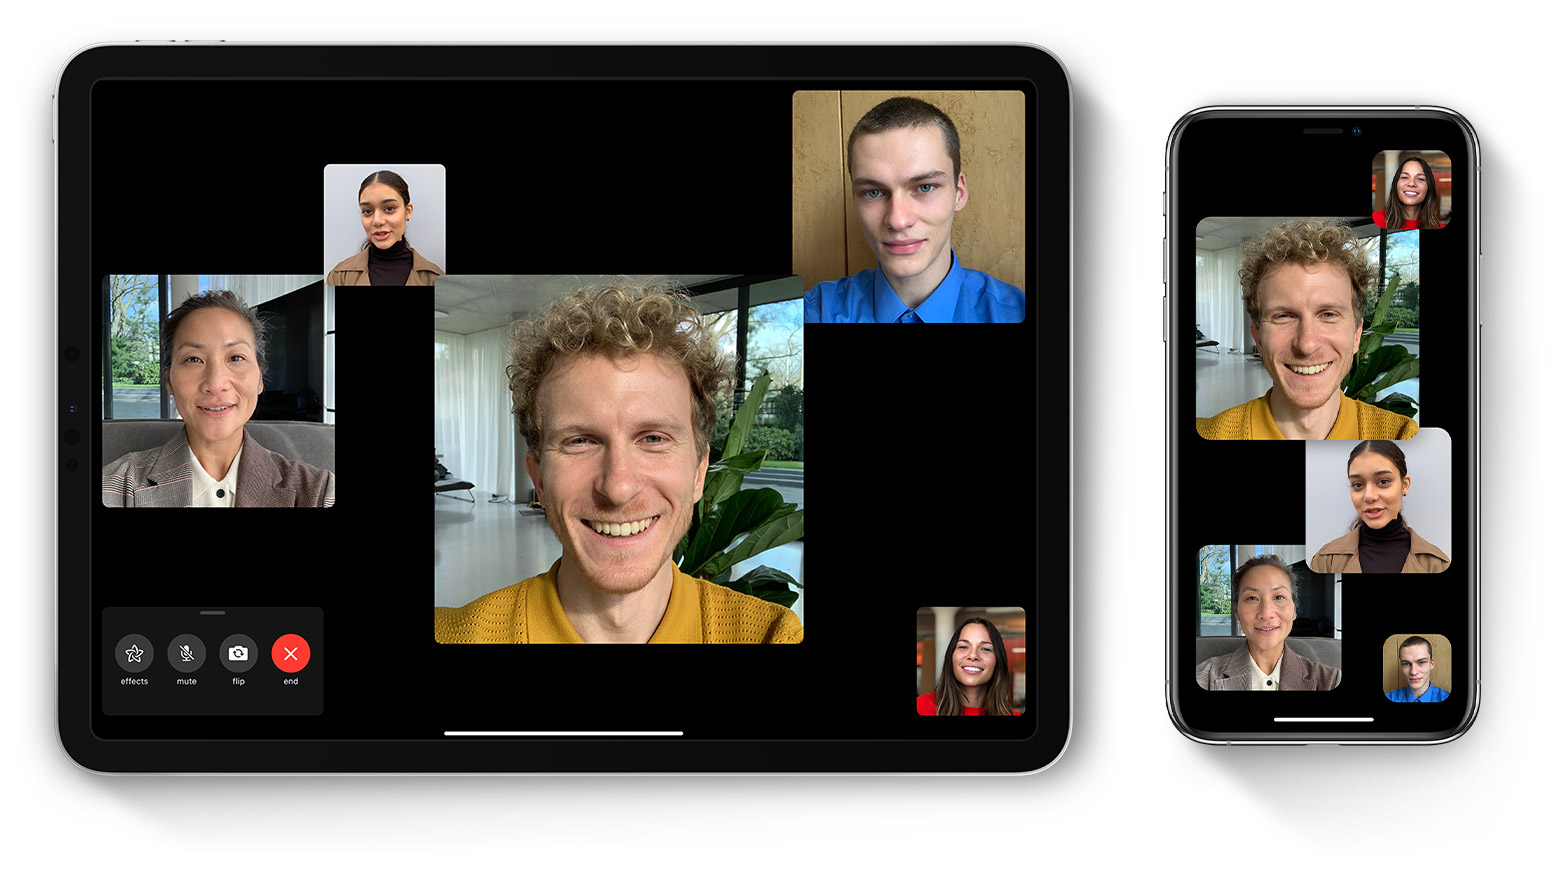 A FaceTime group call on iPad and iPhone.